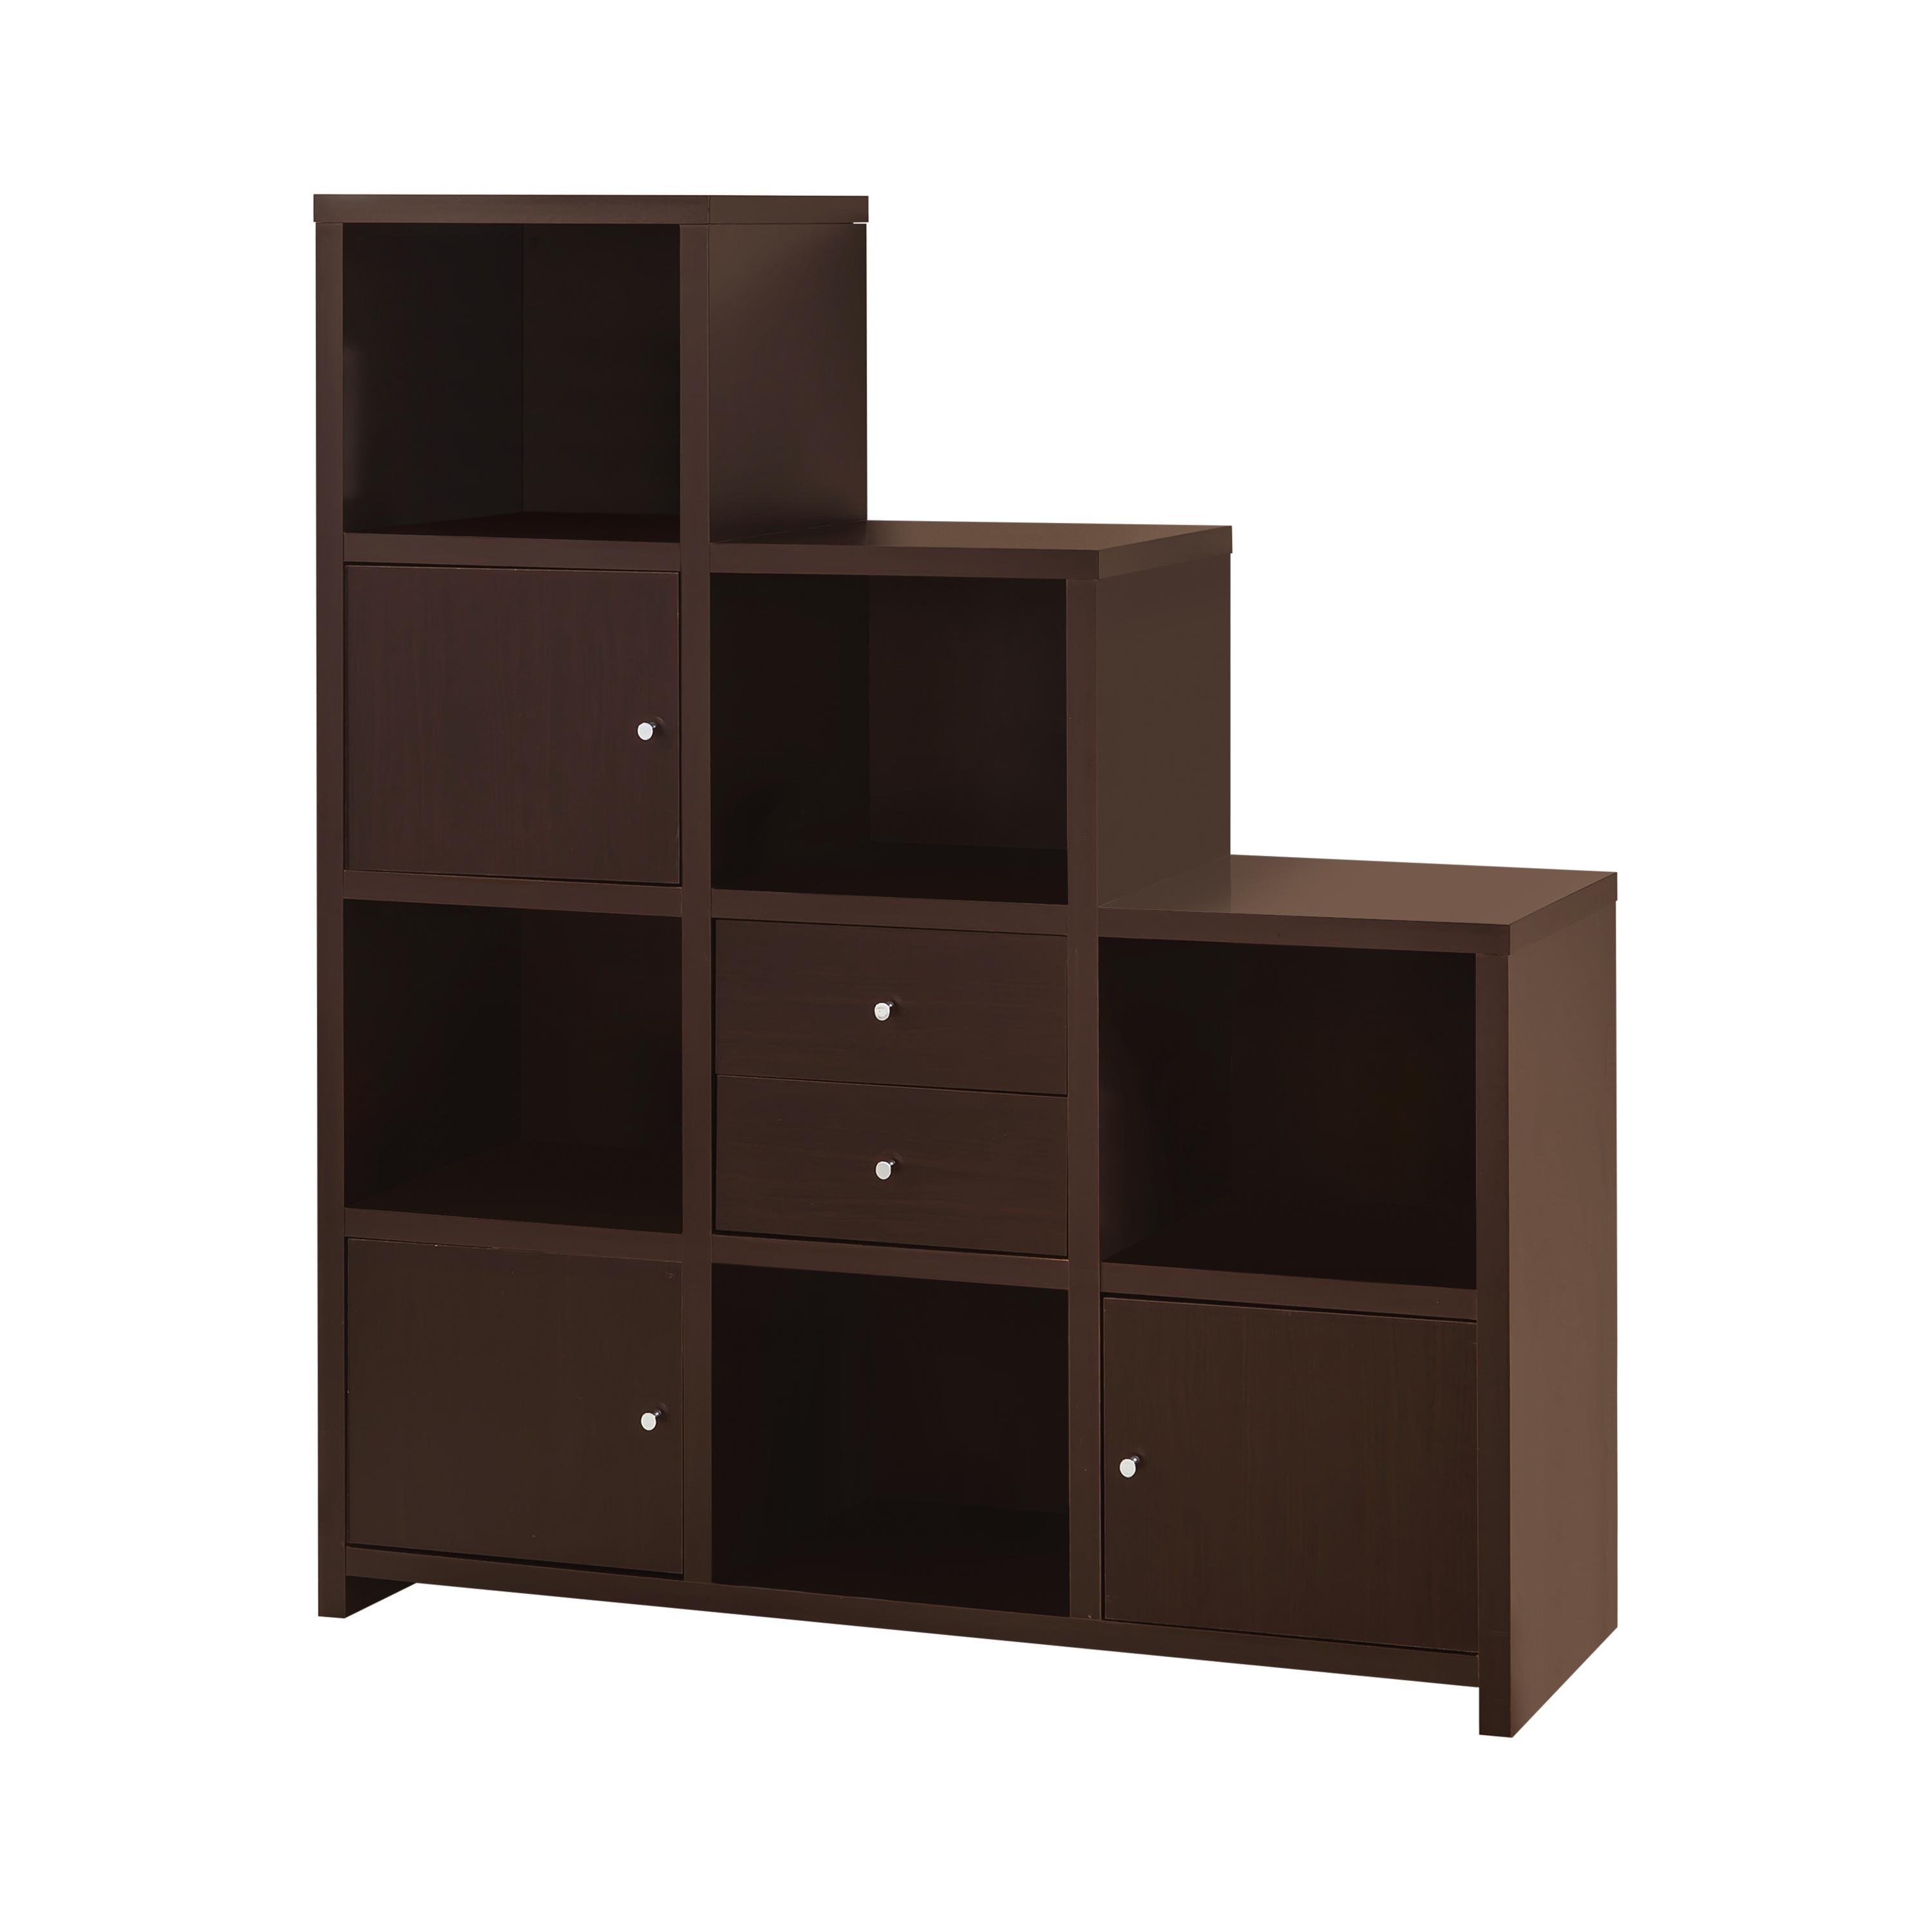 Modern Bookcase 801170 Spencer 801170 in Cappuccino 